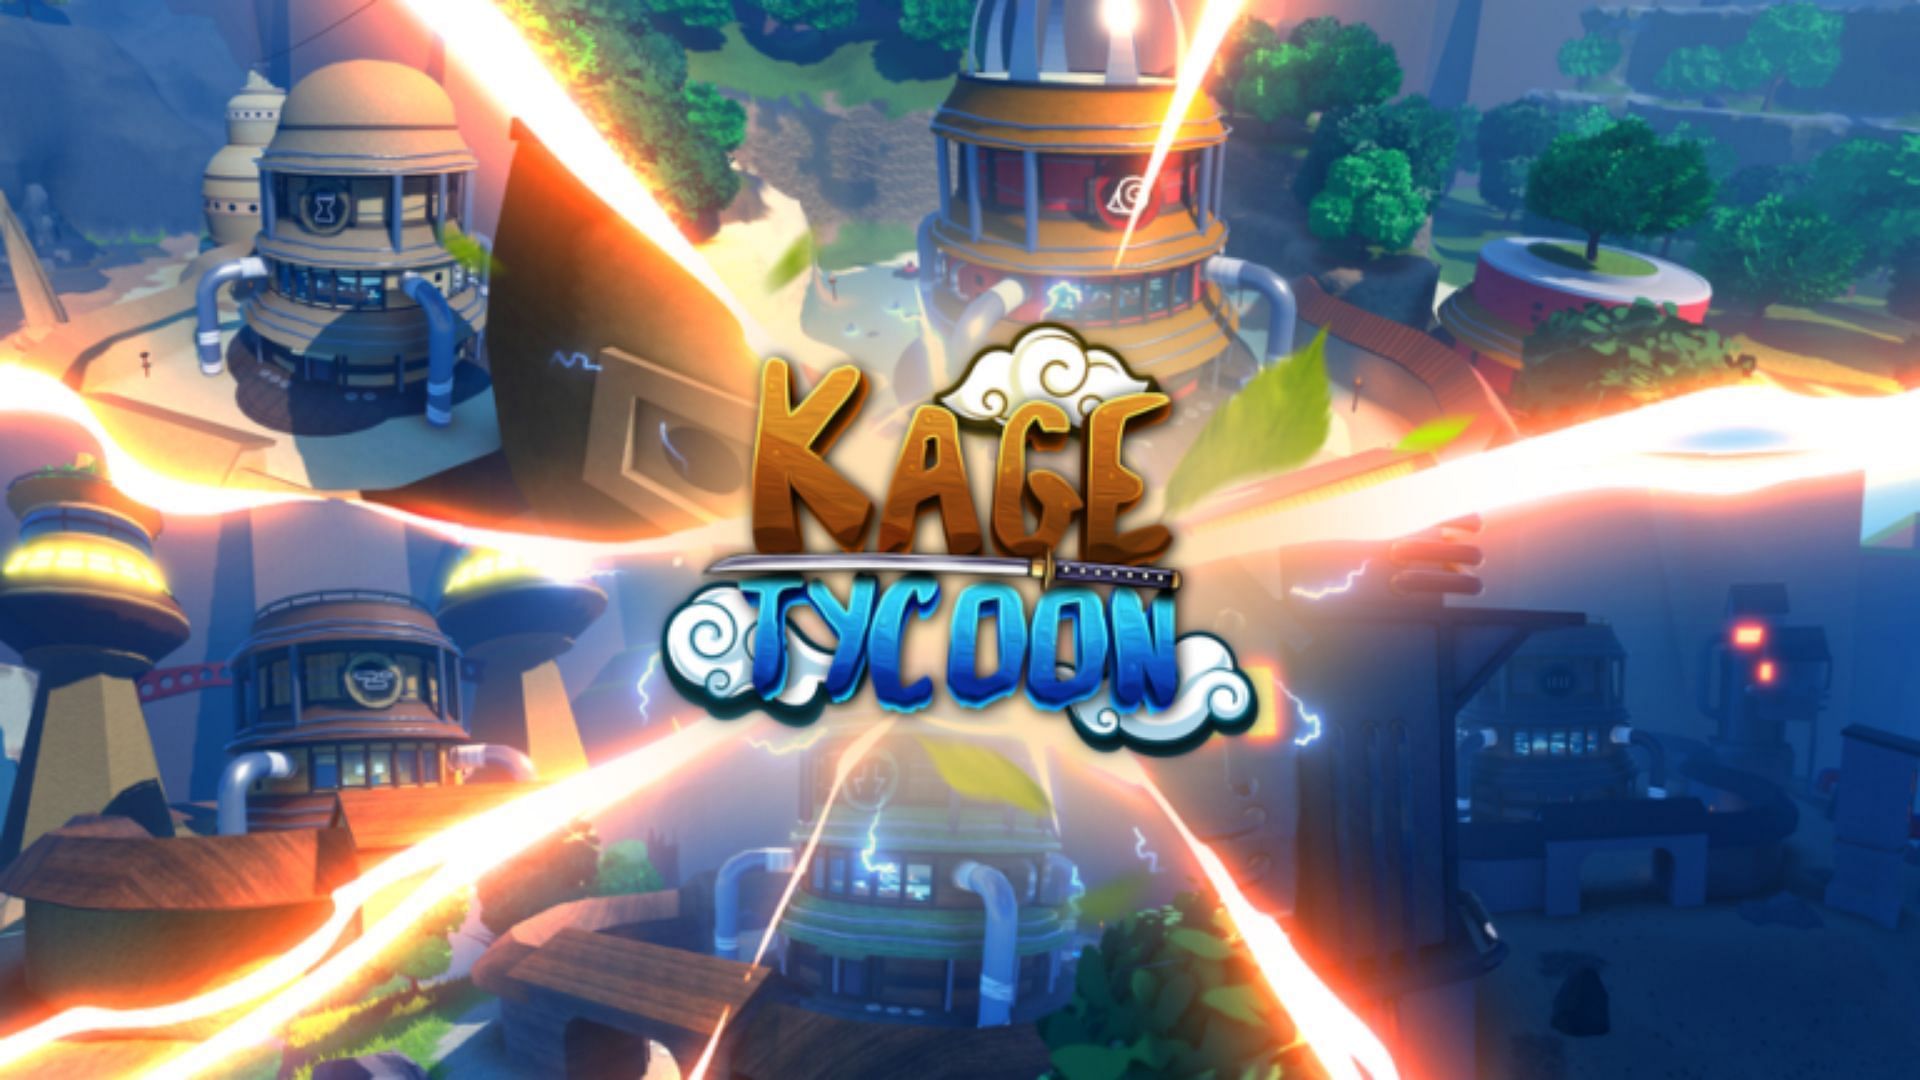 Codes for Kage Tycoon and their importance (Image via Roblox)